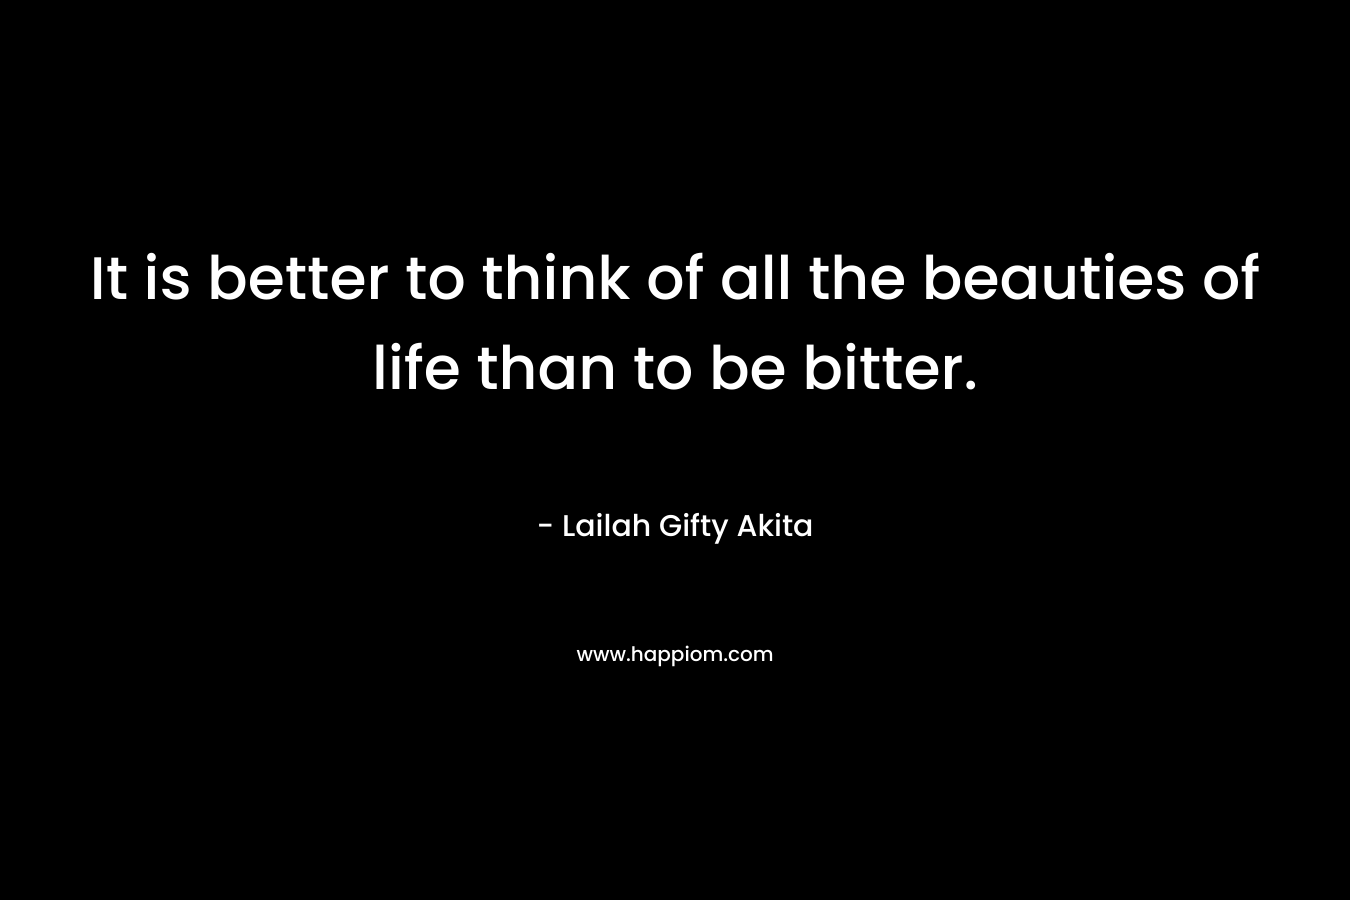 It is better to think of all the beauties of life than to be bitter.